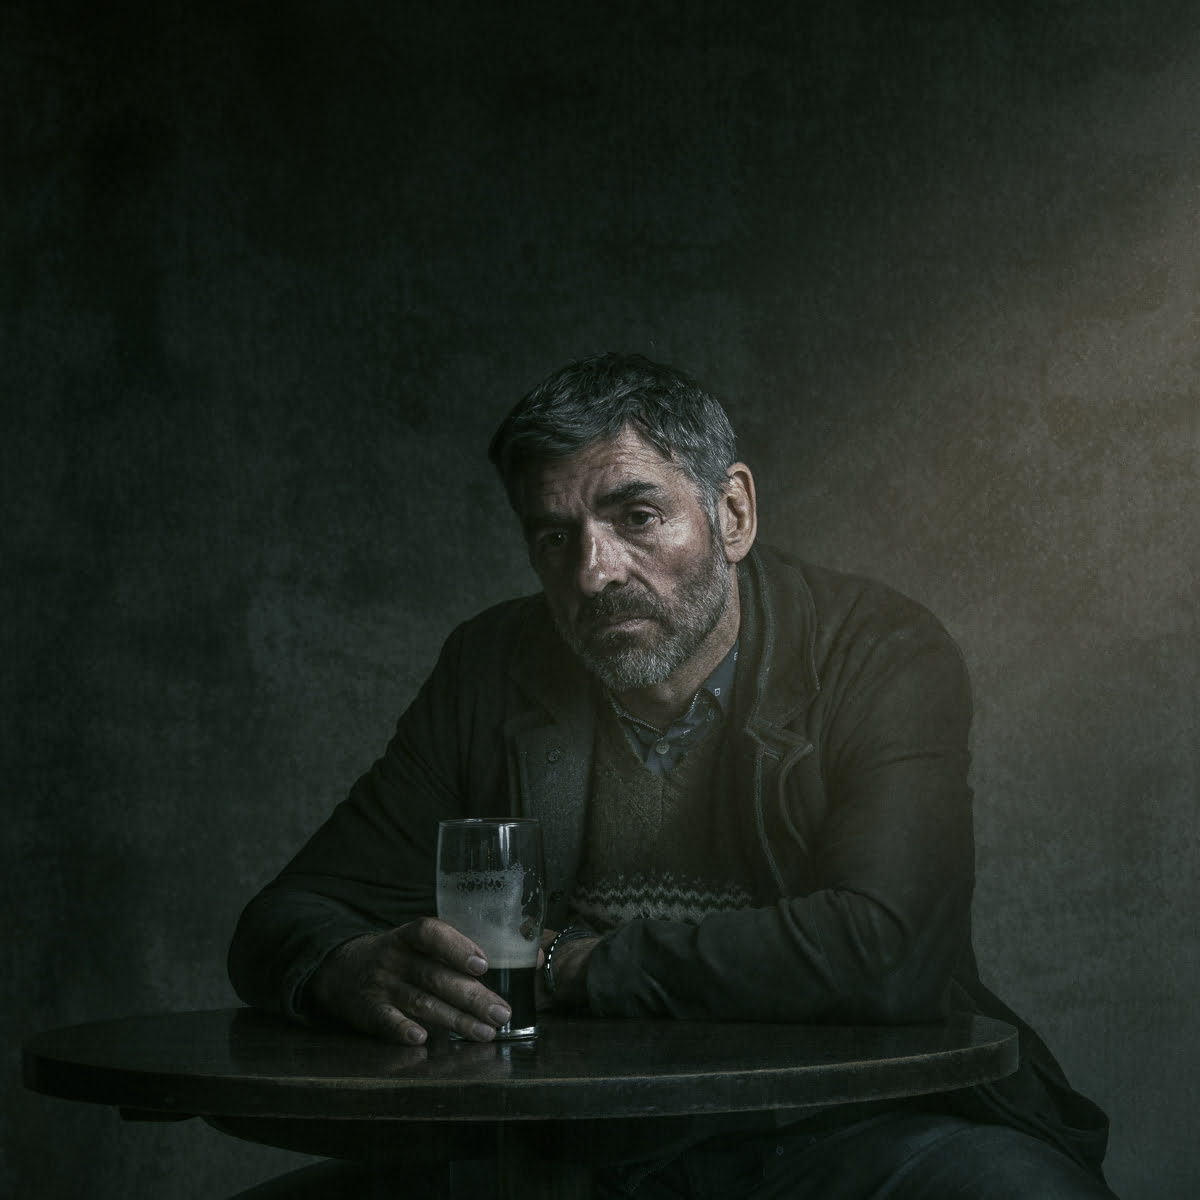 Portraits and poster image shot for ETT's production of the Conor McPherson pay